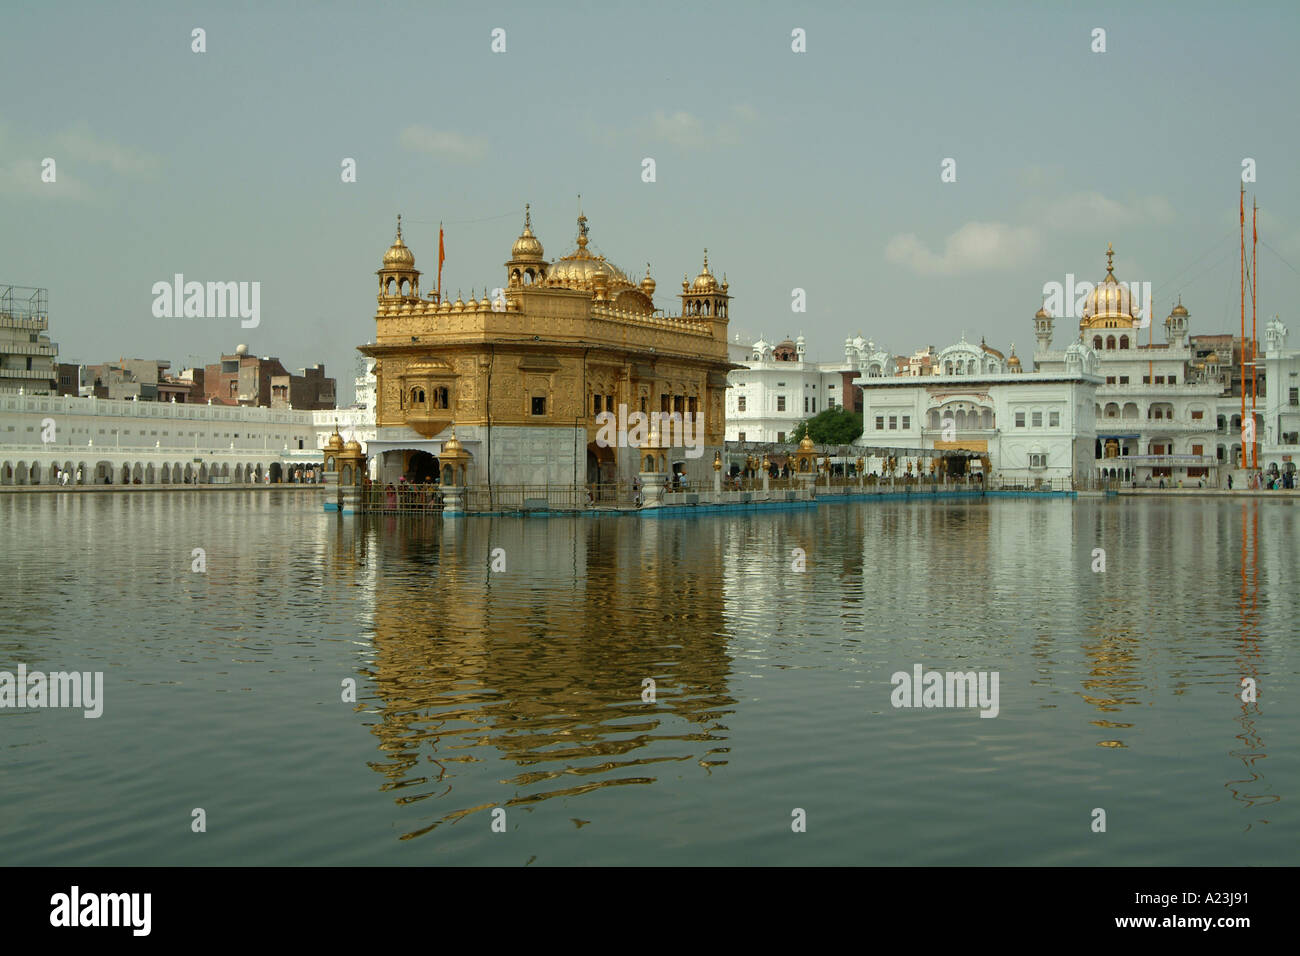 Golden temple and Akal takht Stock Photo - Alamy